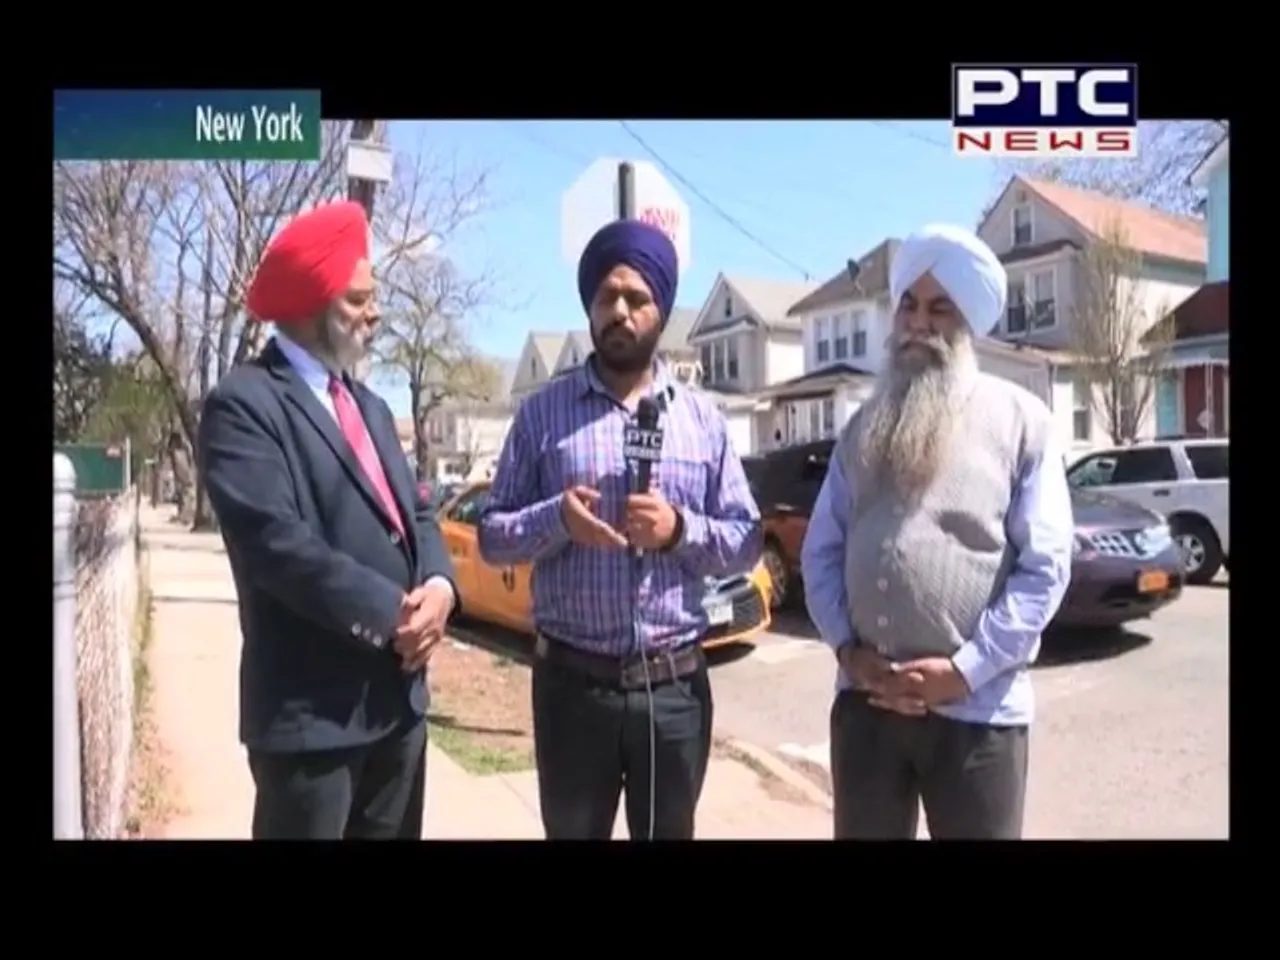 NYC Sikh taxi driver assaulted, turban ripped off head